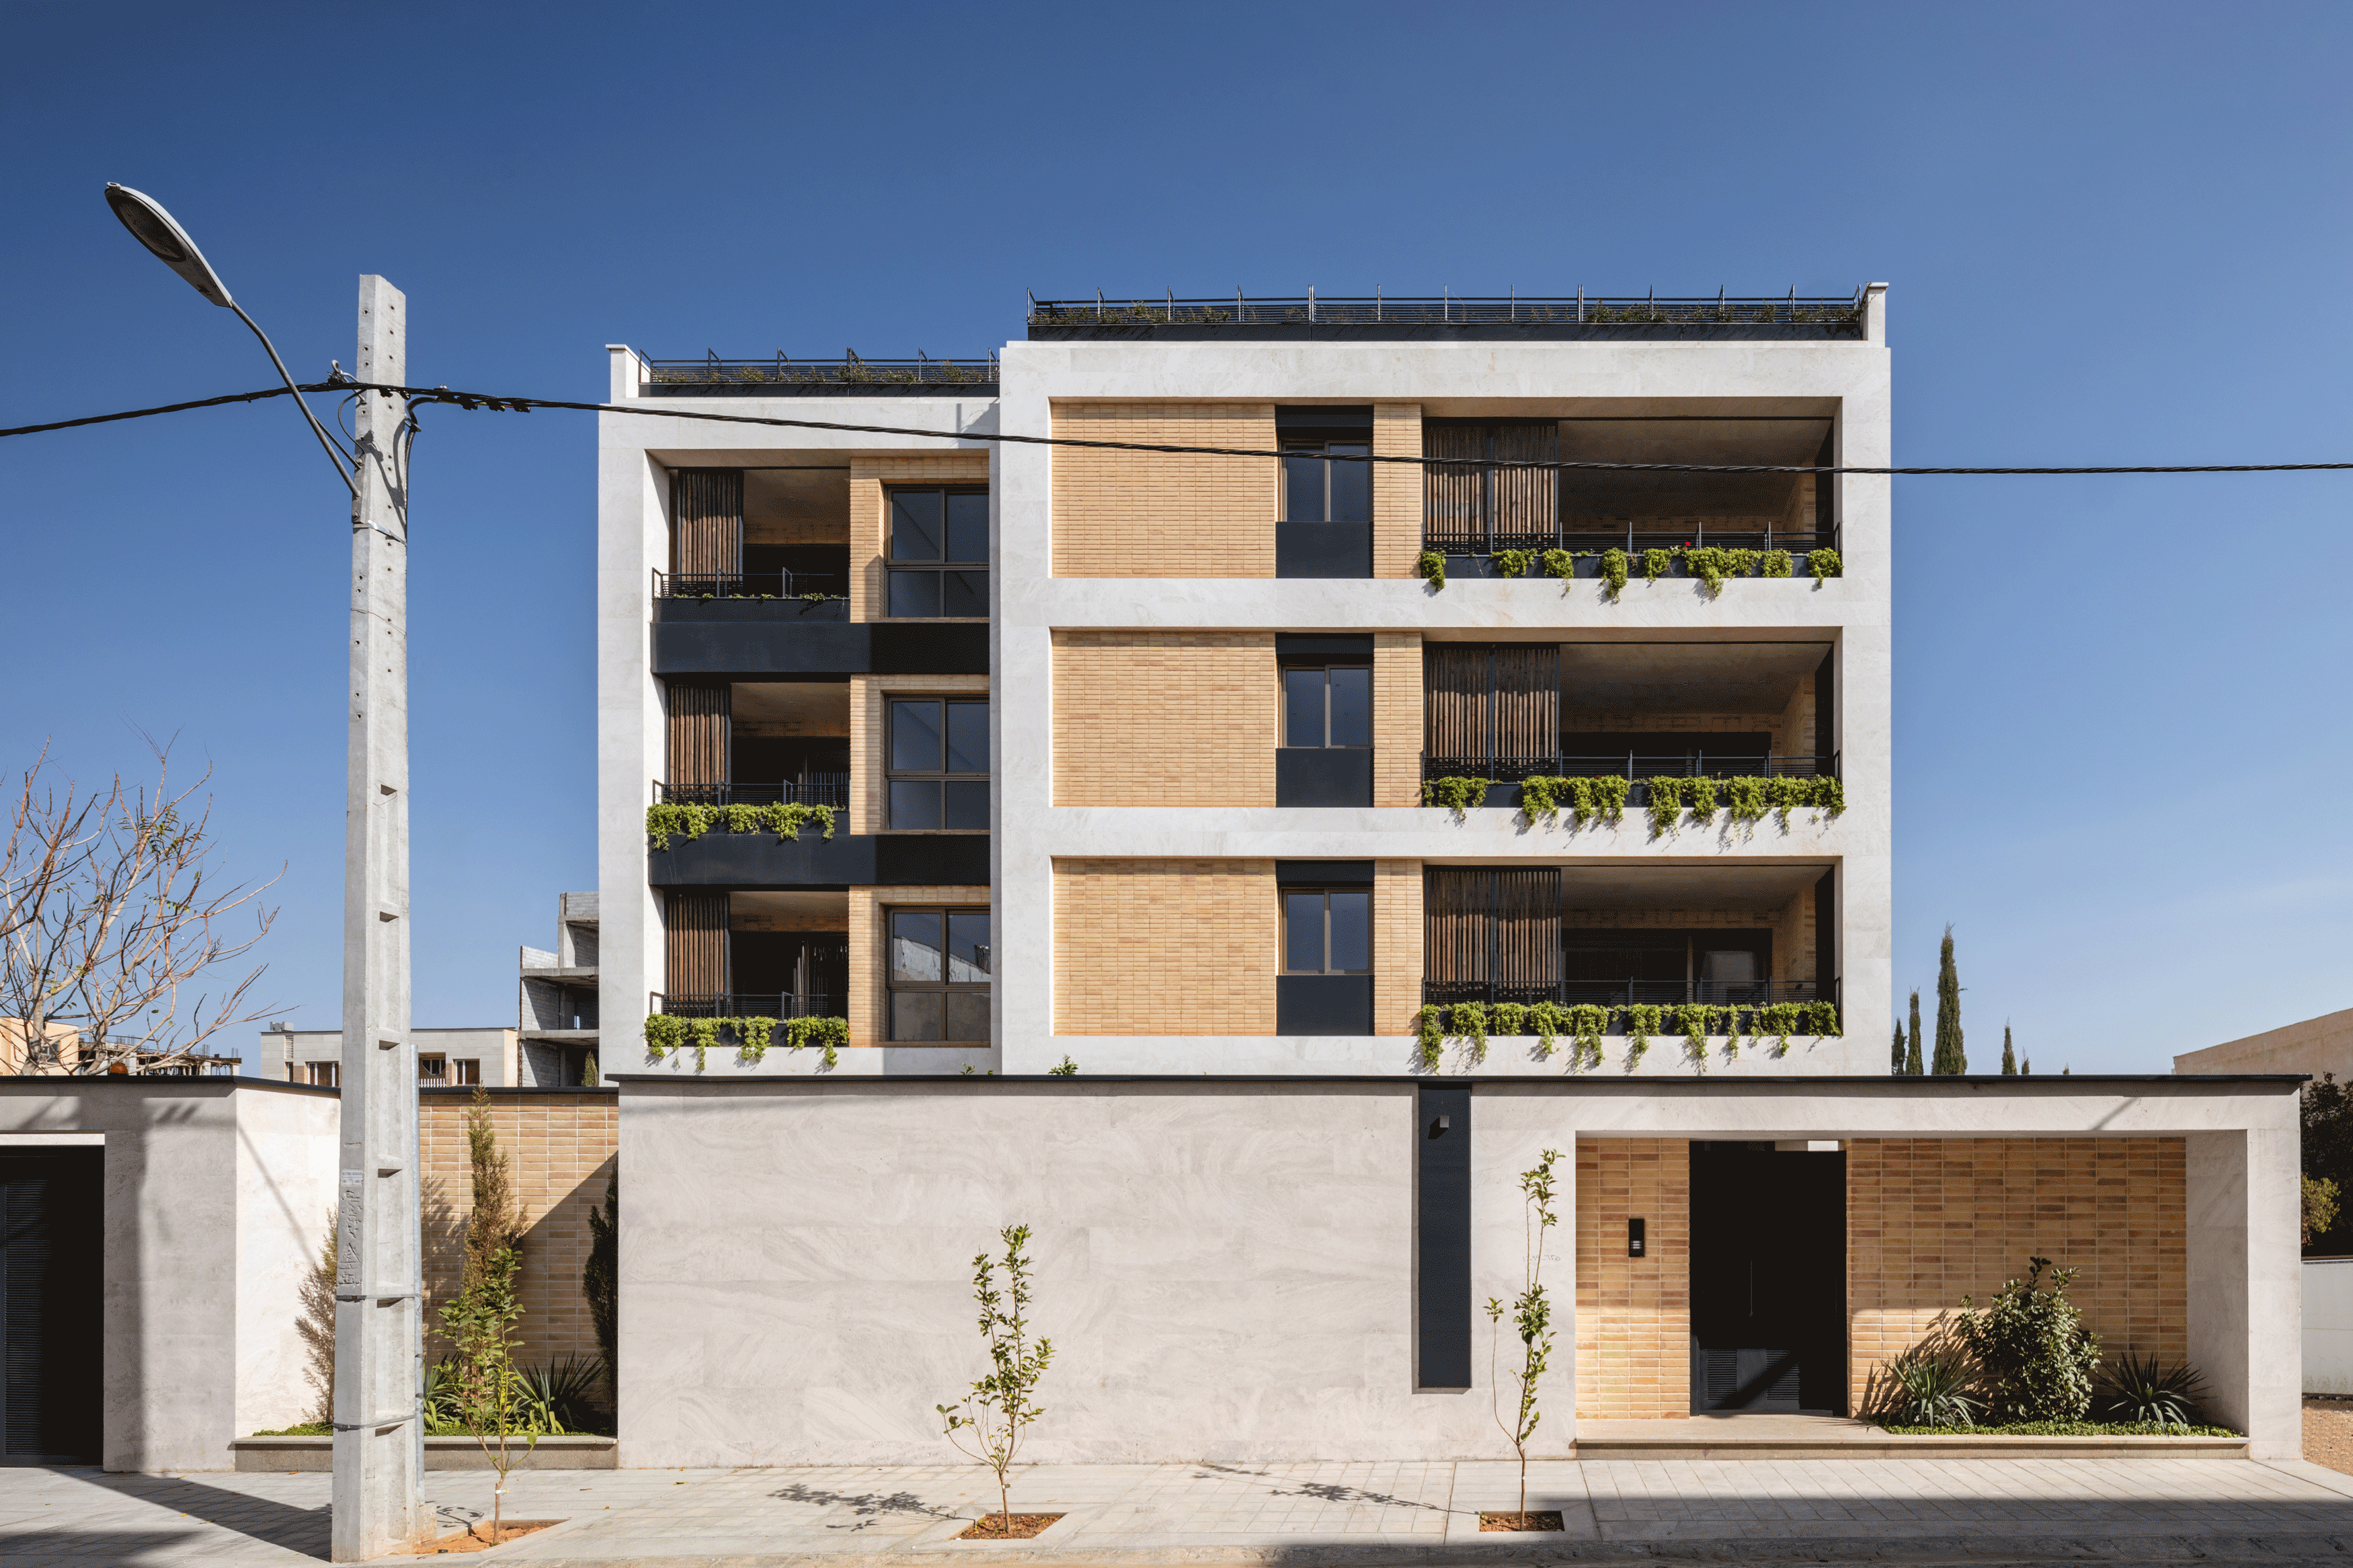 picture no. 3 ofApartment No. 05 project, designed by Ahmad Ghodsimanesh & Partners